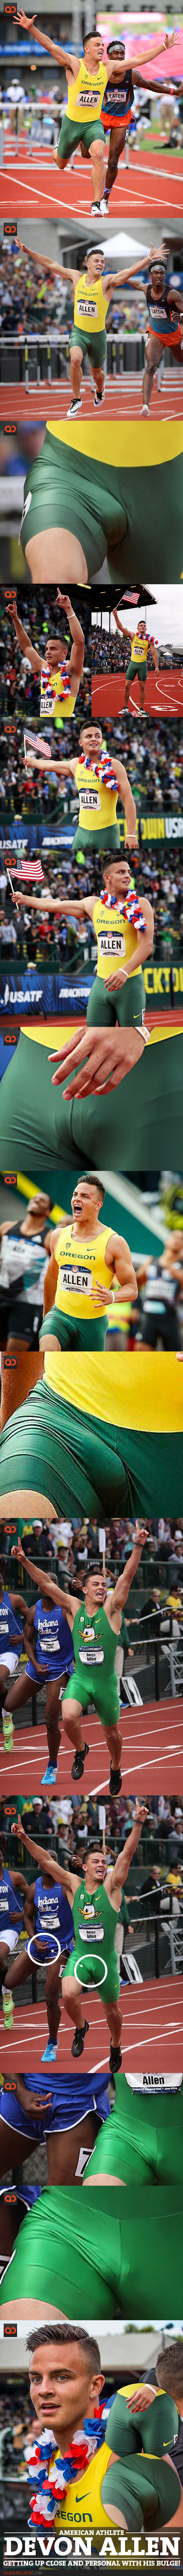 Devon Allen, American Athlete, Getting Up Close And Personal With His Bulge!